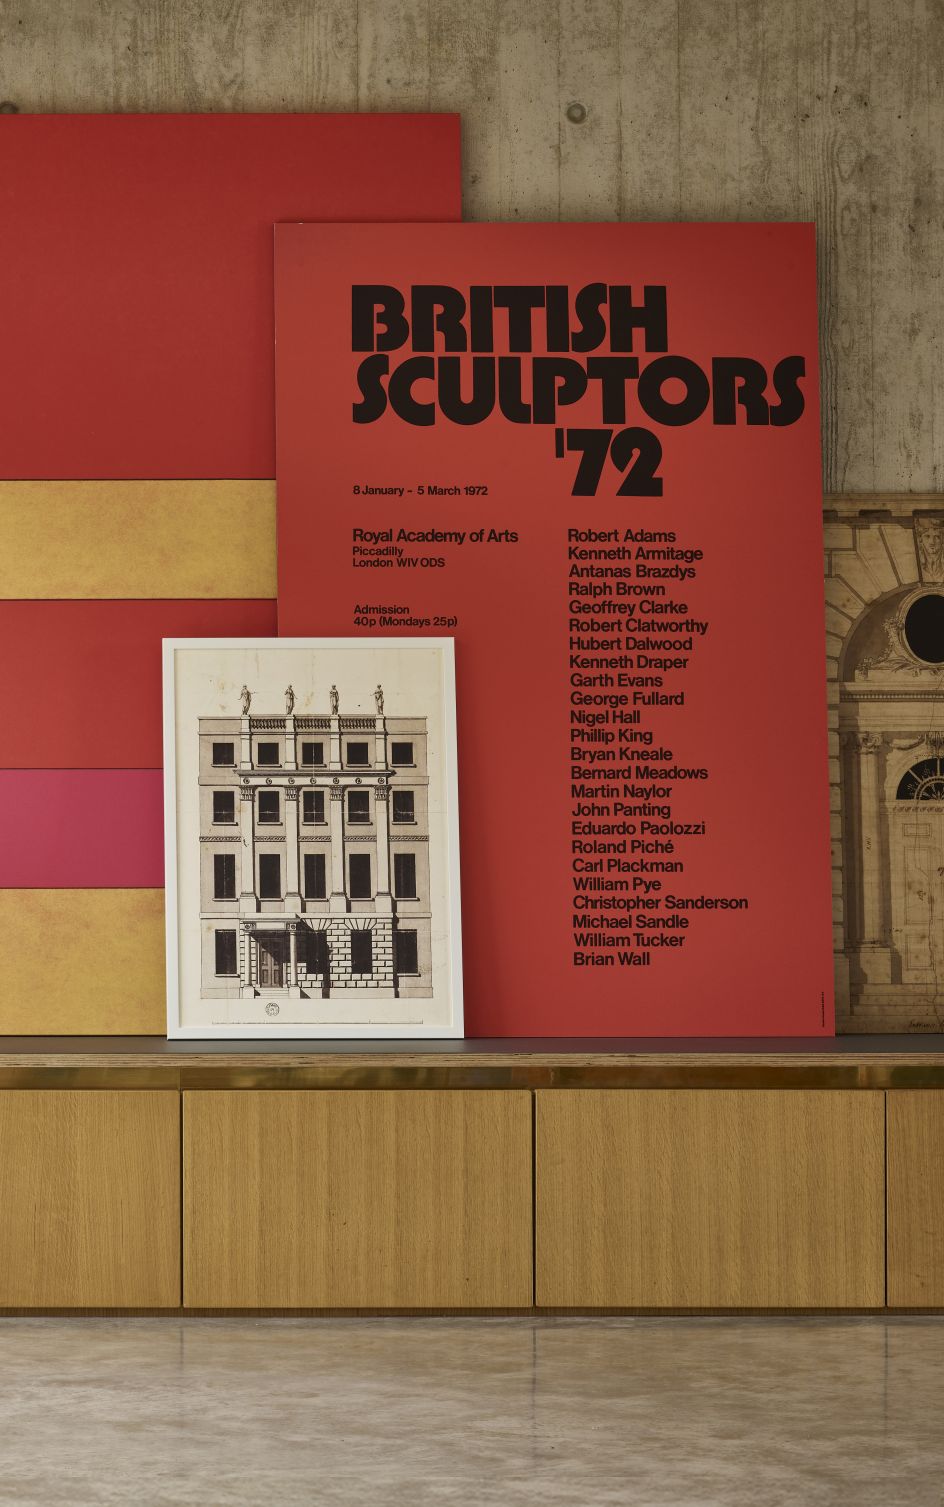 RA British Sculptors Exhibition 1972 Epic Poster​ from the Royal Academy of Arts Collection